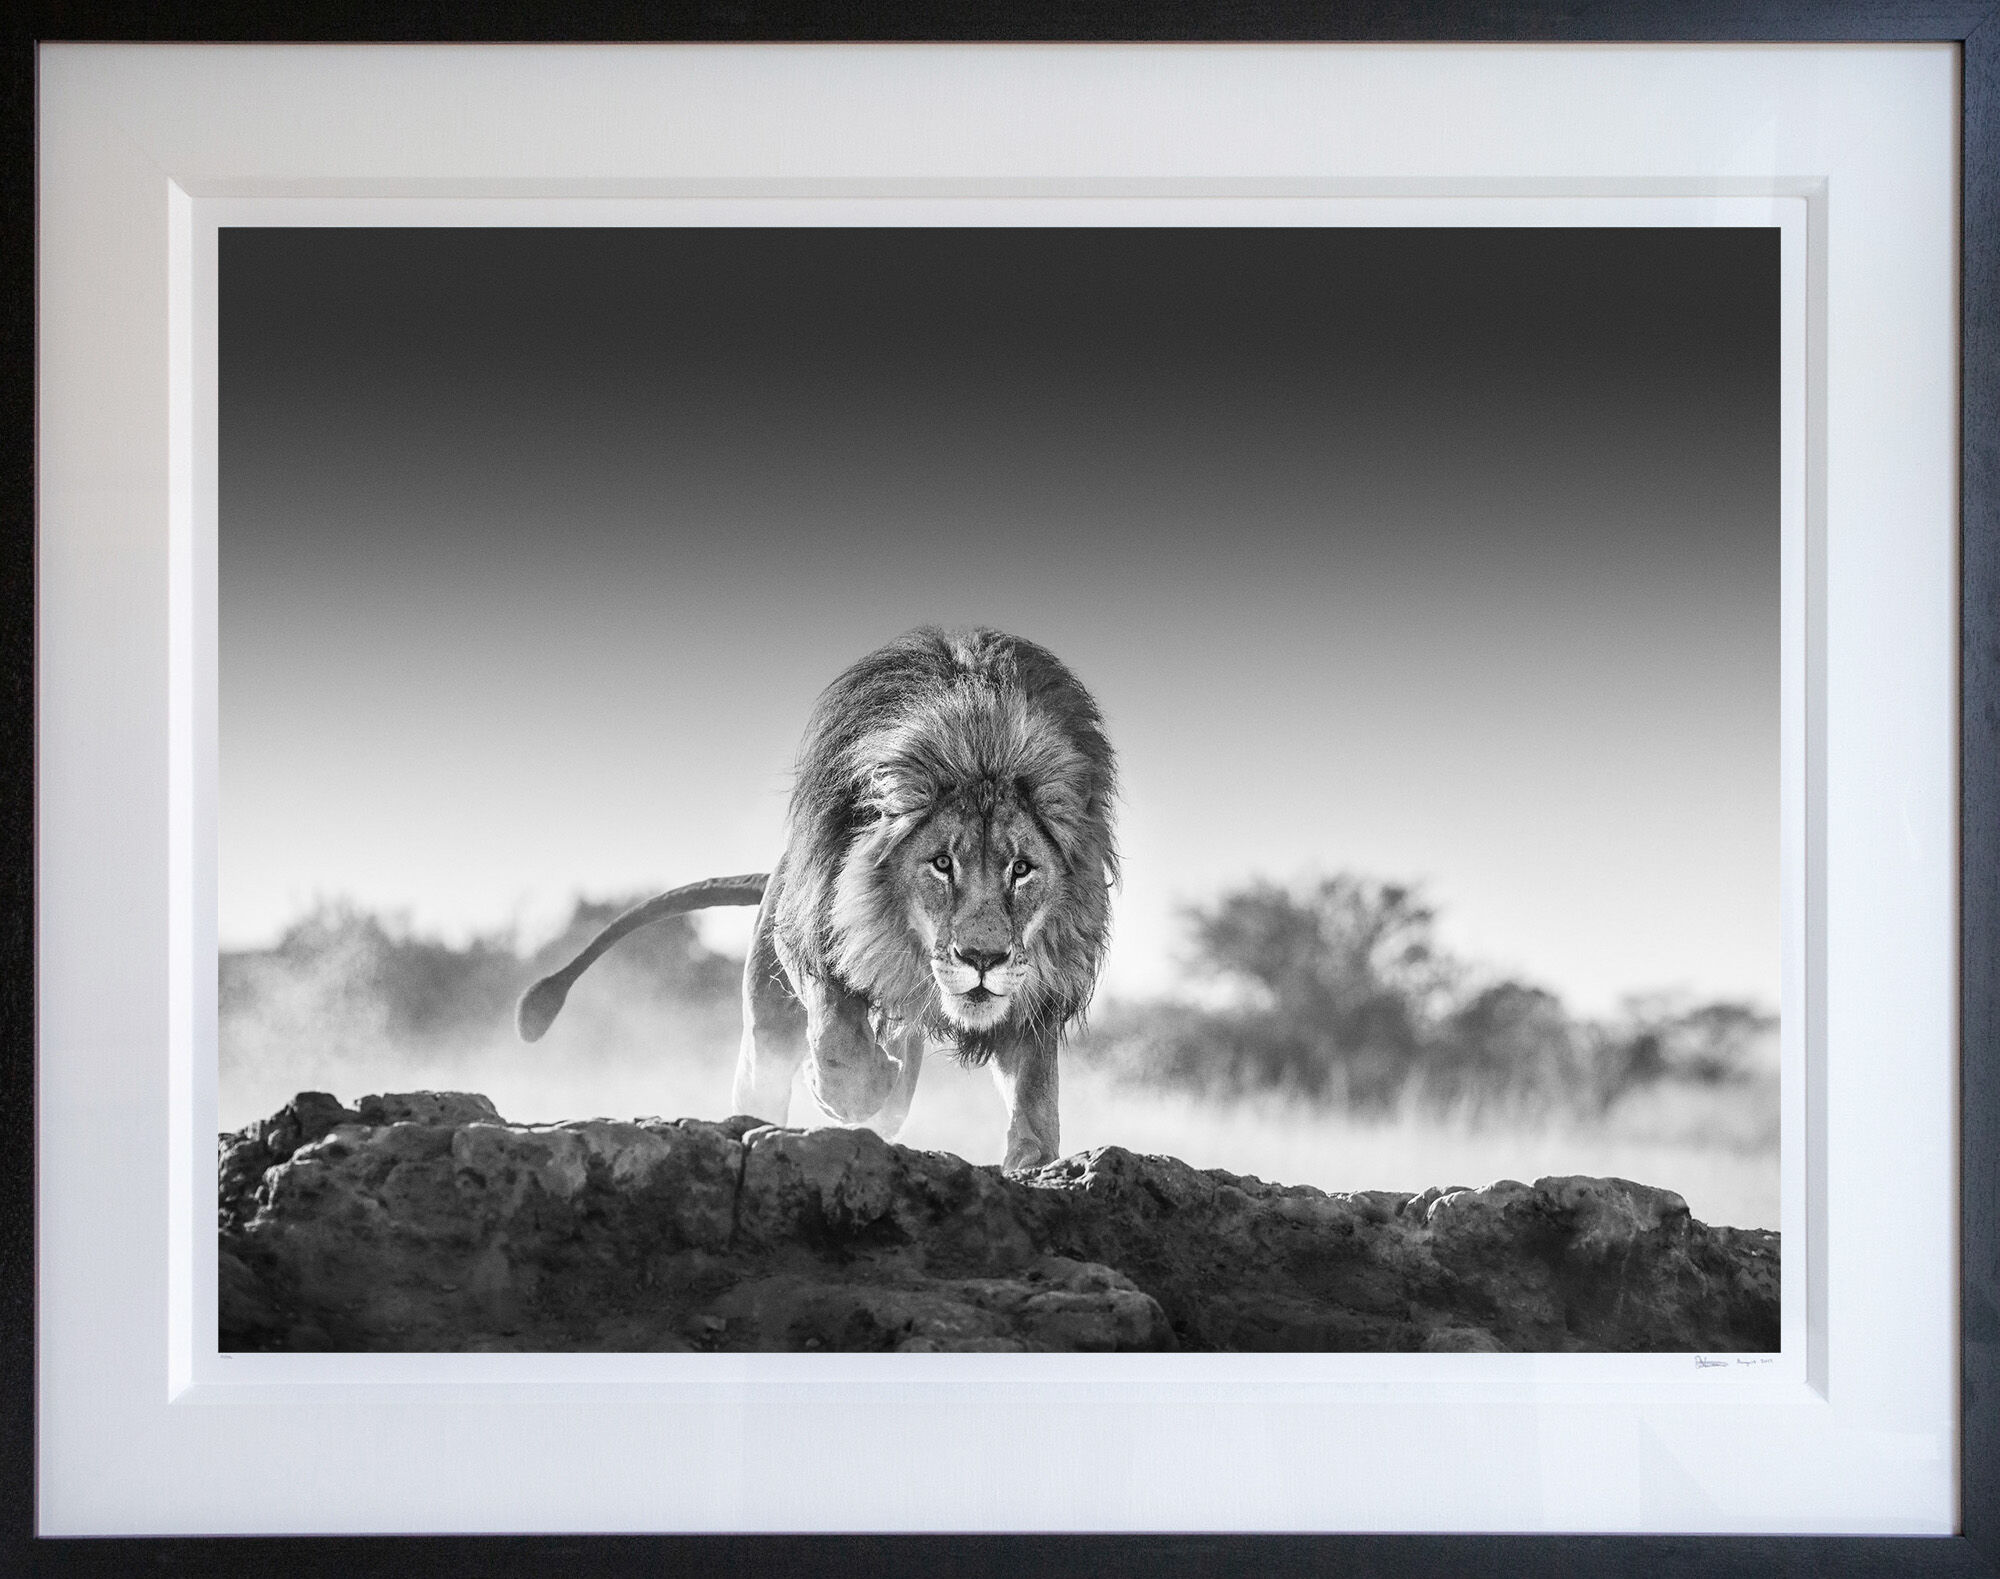 Picture "Relentless" (2017) by David Yarrow